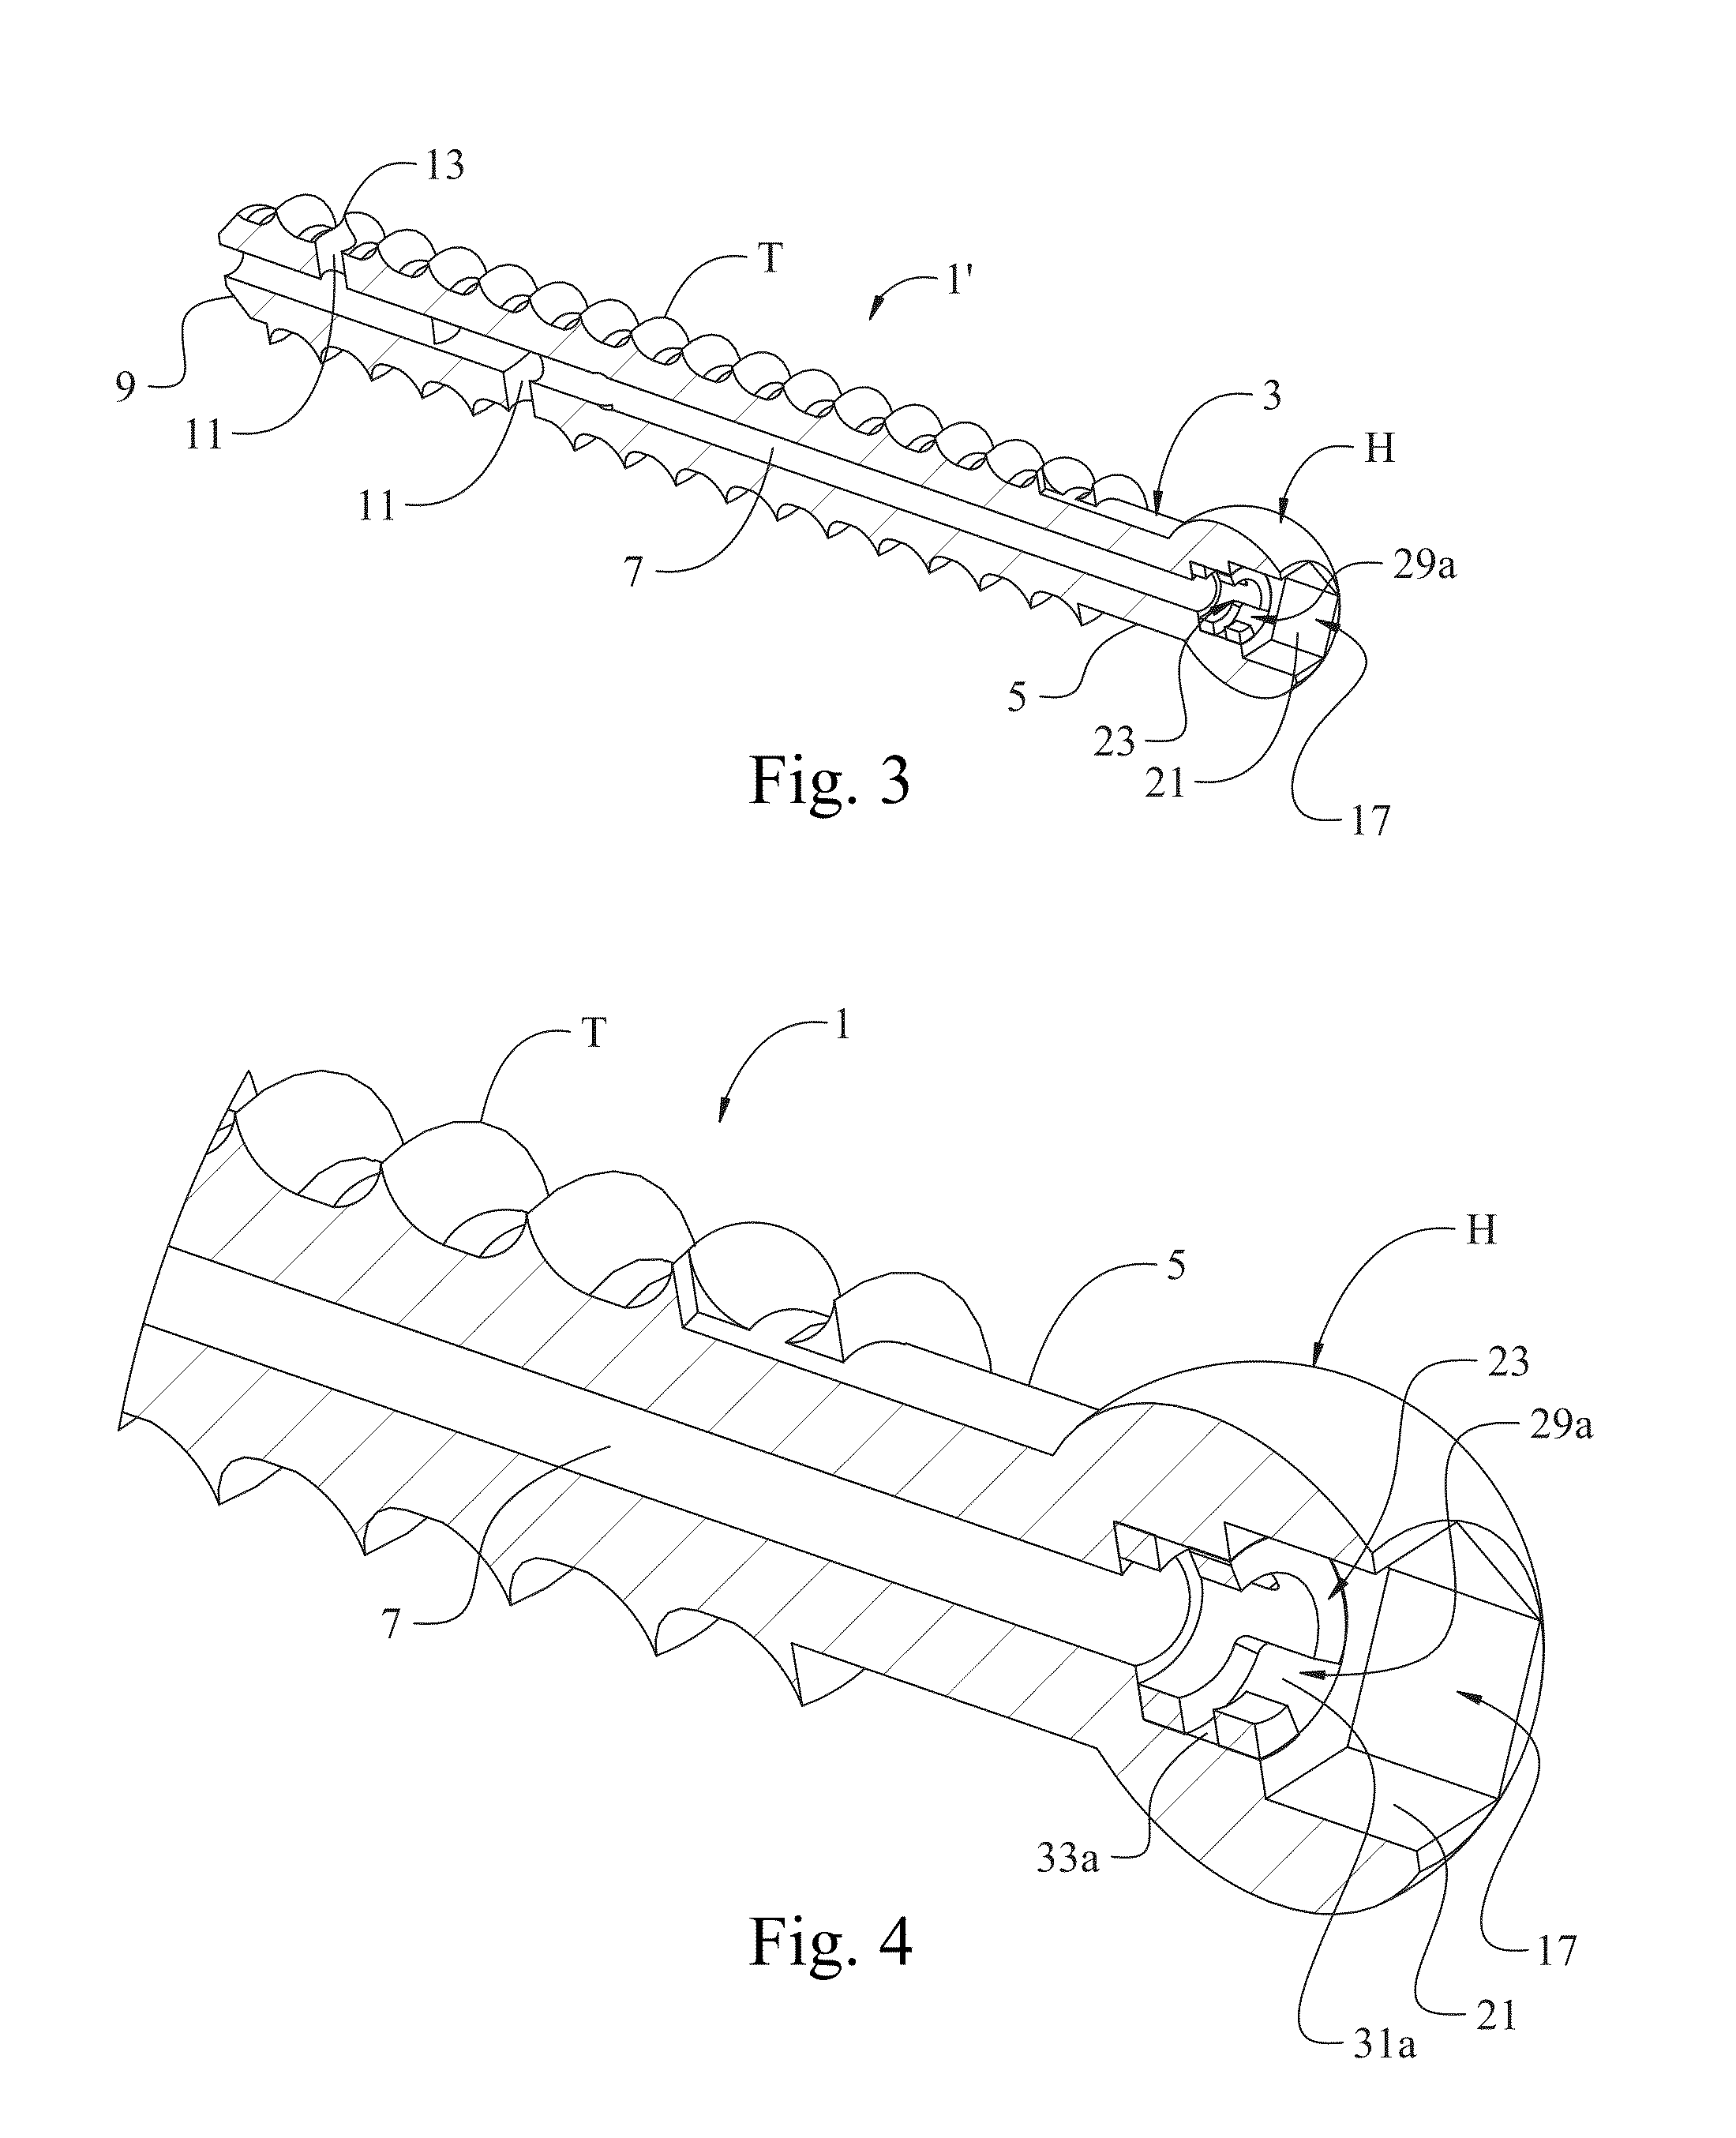 Fenestrated bone screw and method of injecting bone cement into bone structure